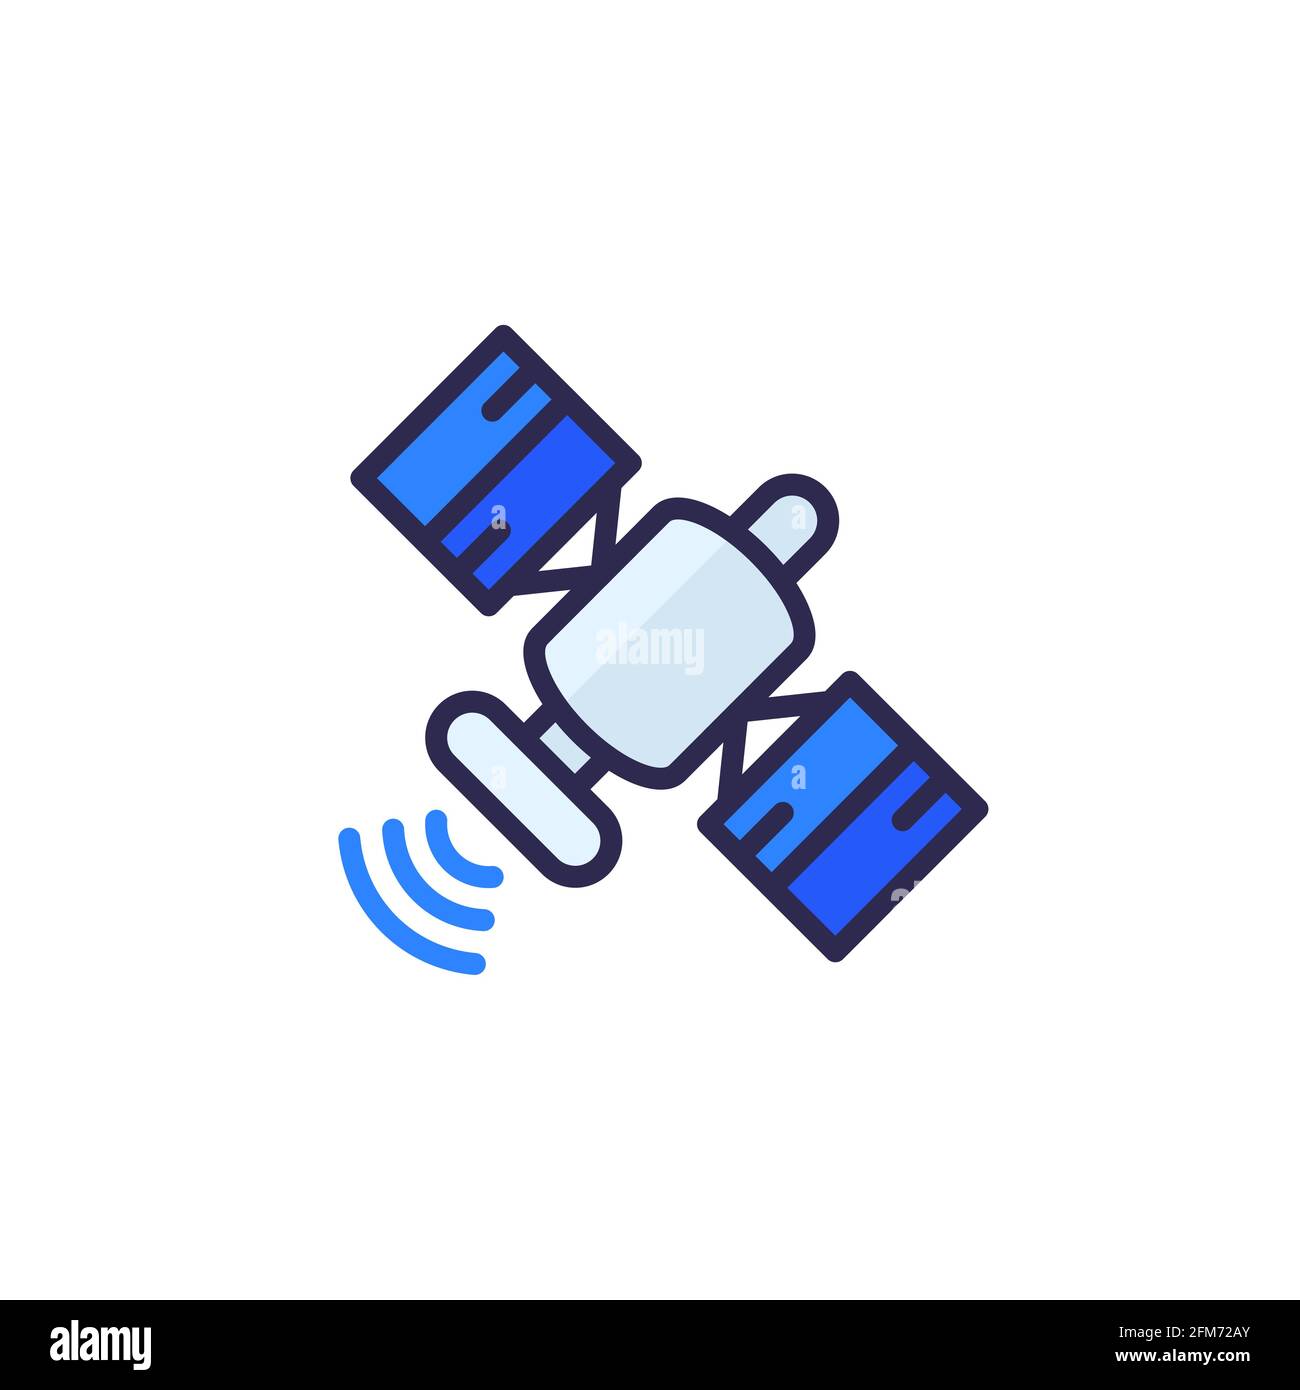 satellite icon on white with outline Stock Vector